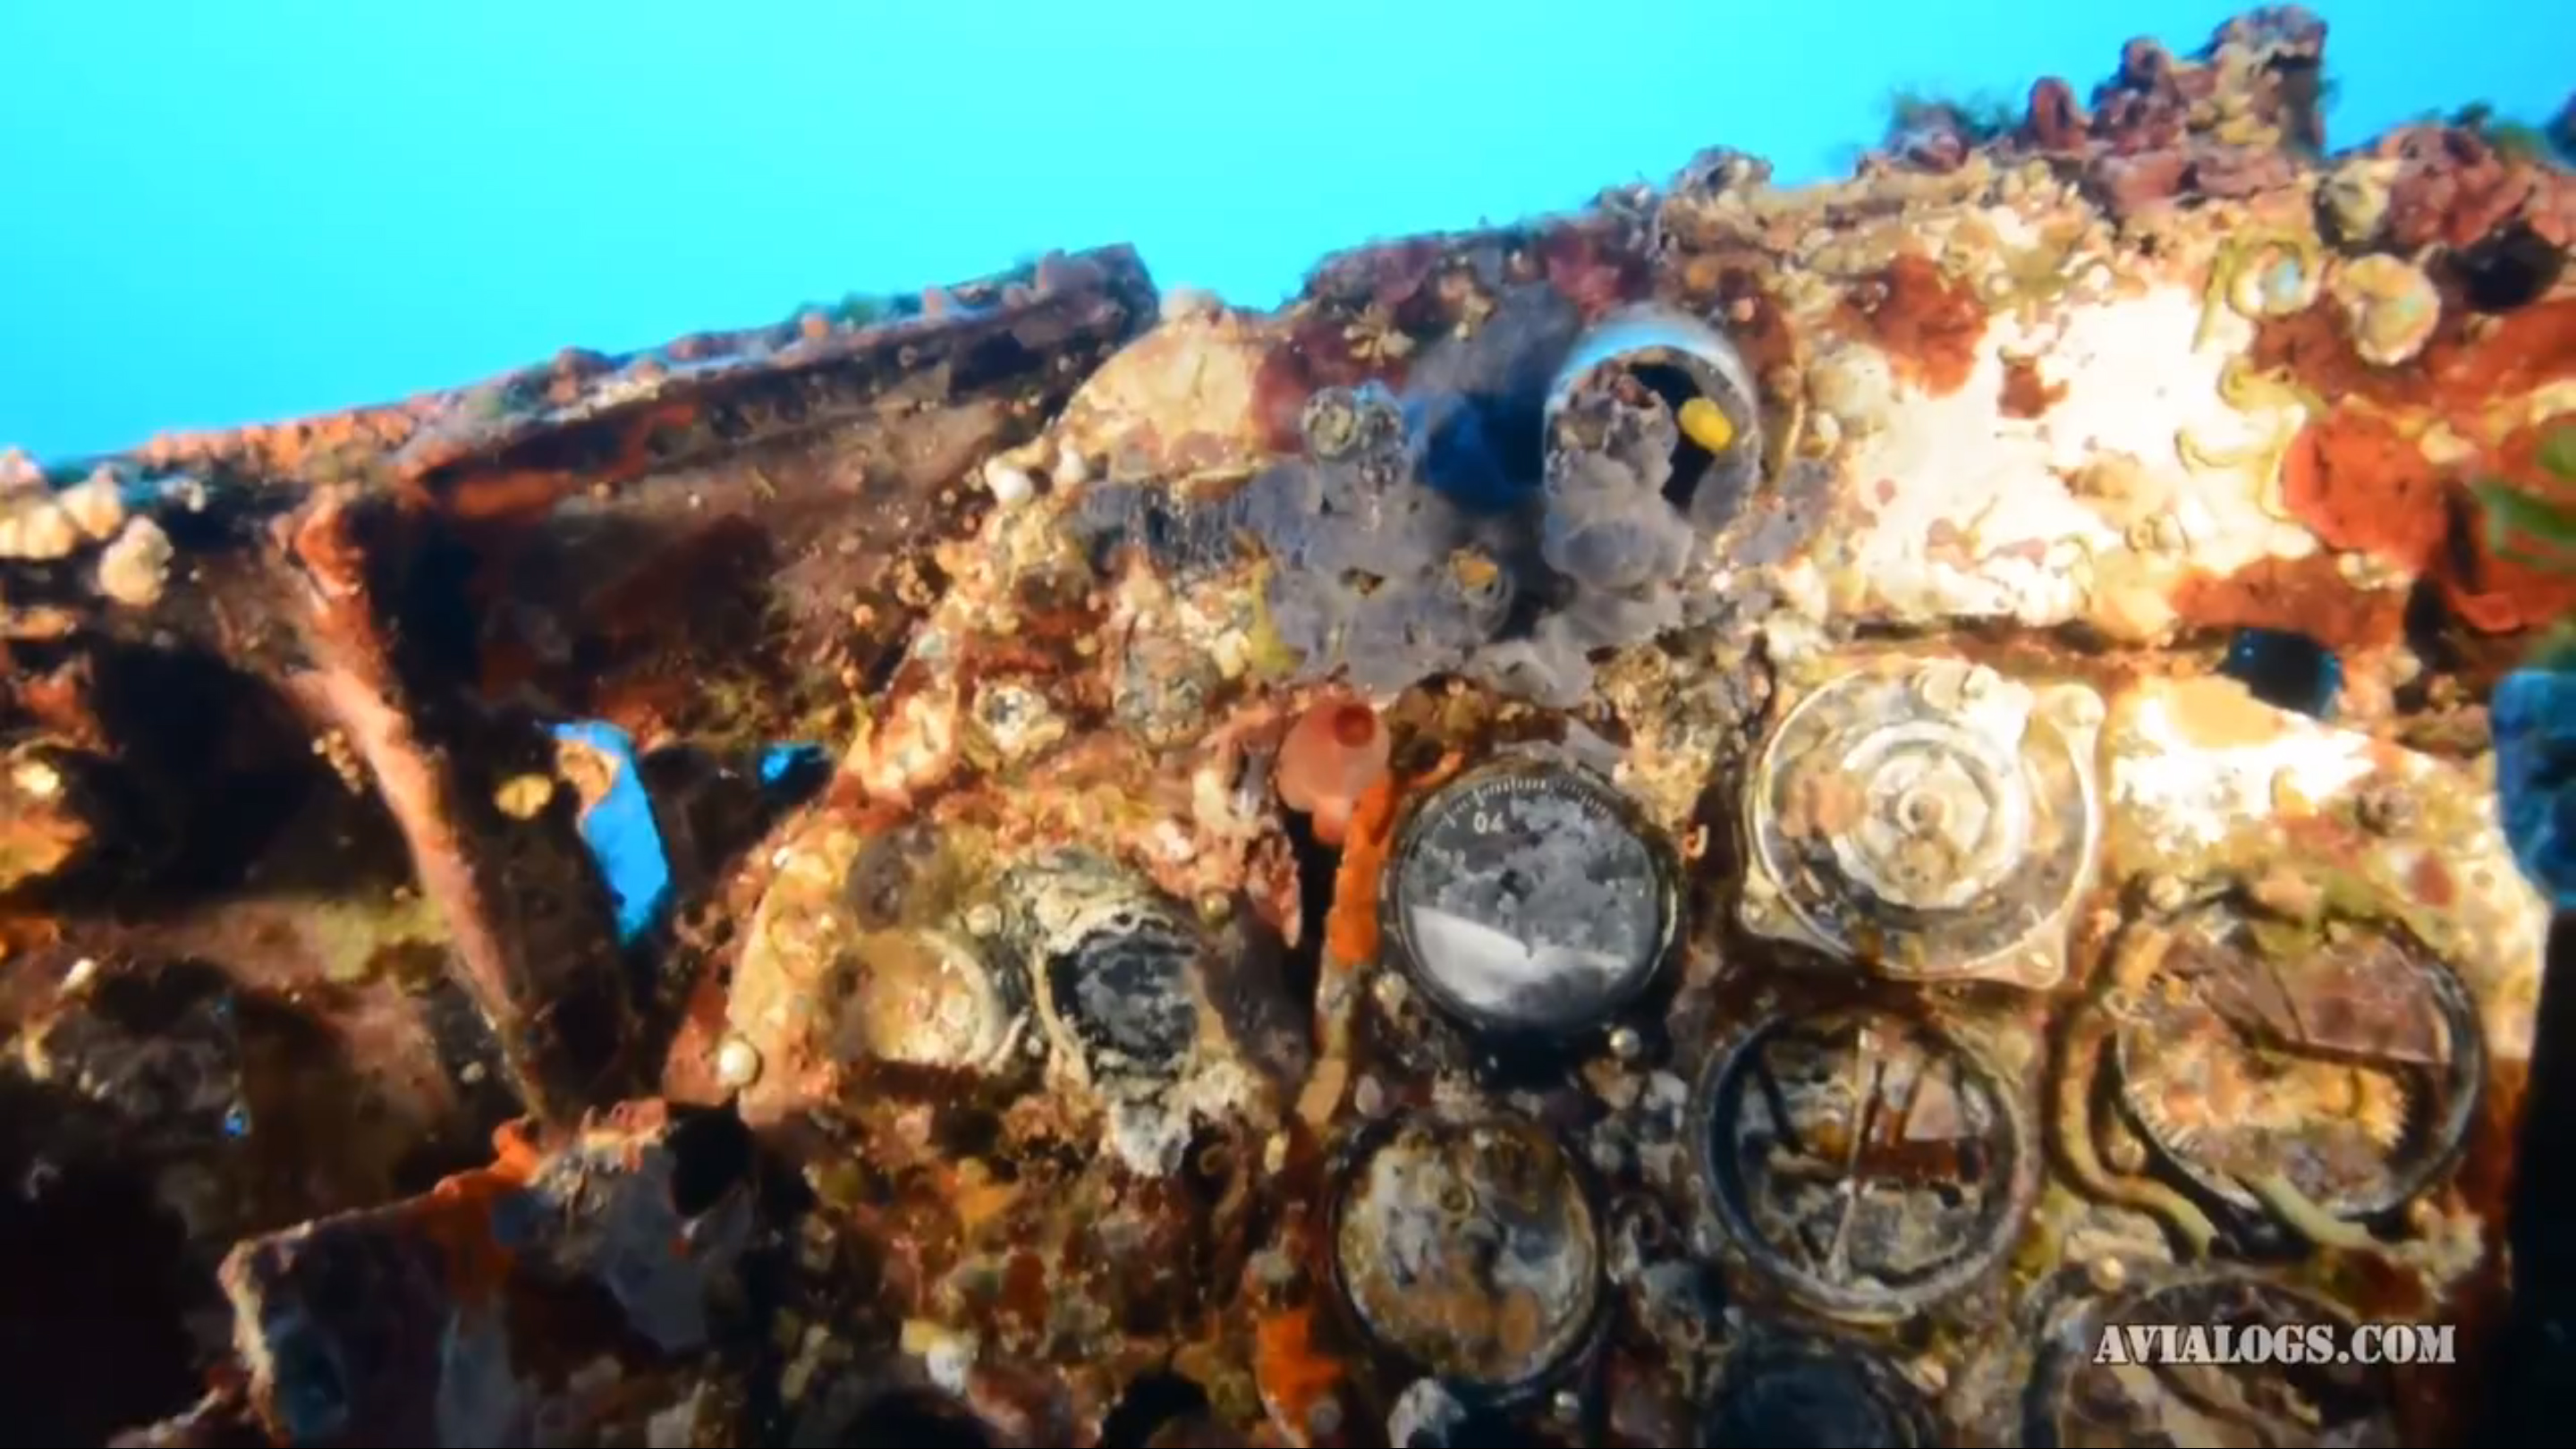 Part of the Stuka's control panel, showing some surprisingly intact instruments. (video capture as noted earlier)